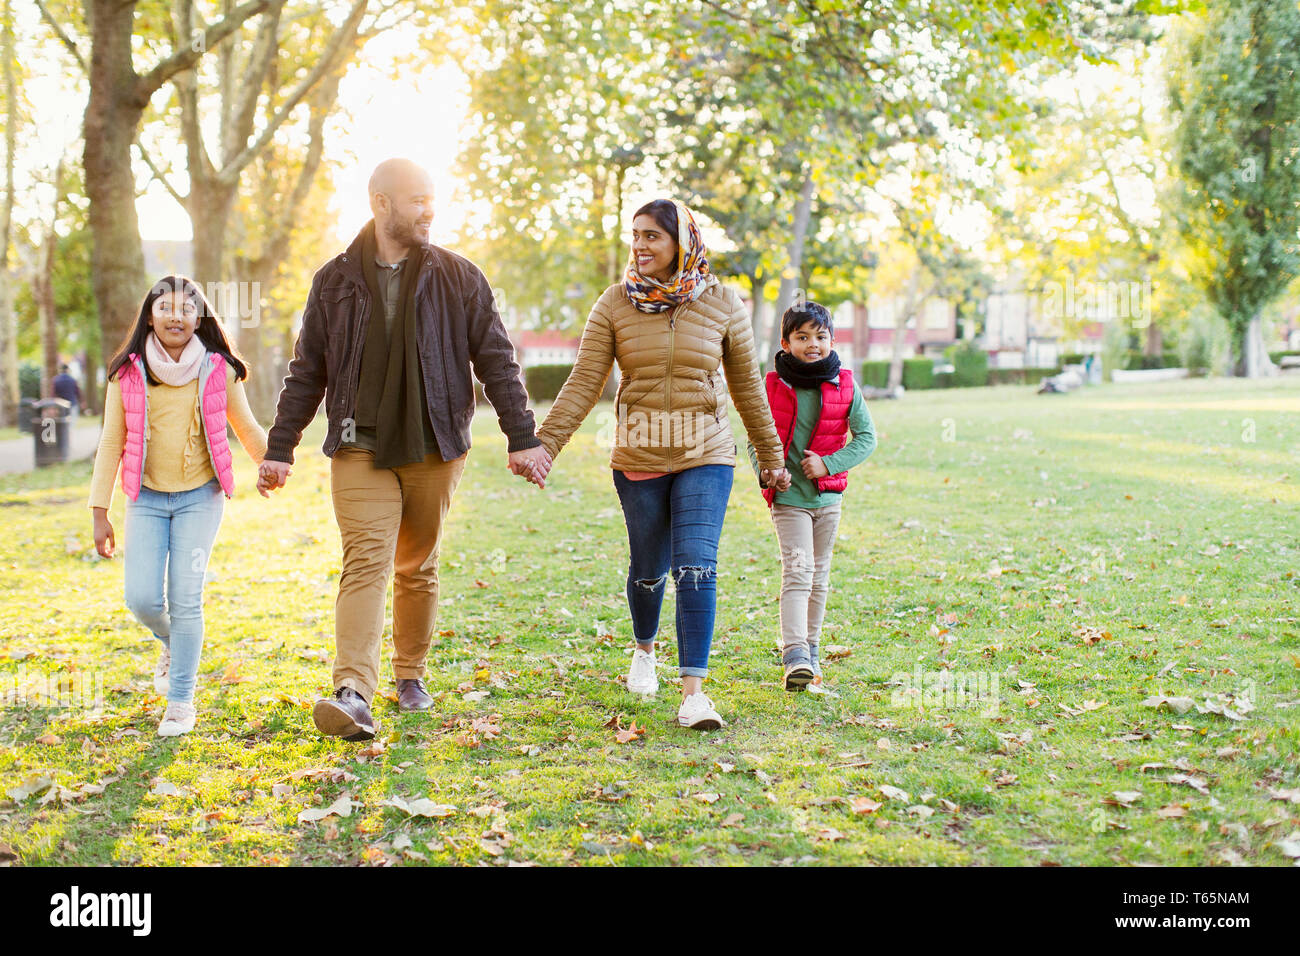 Muslim family holding hands, walking in sunny autumn park Stock Photo